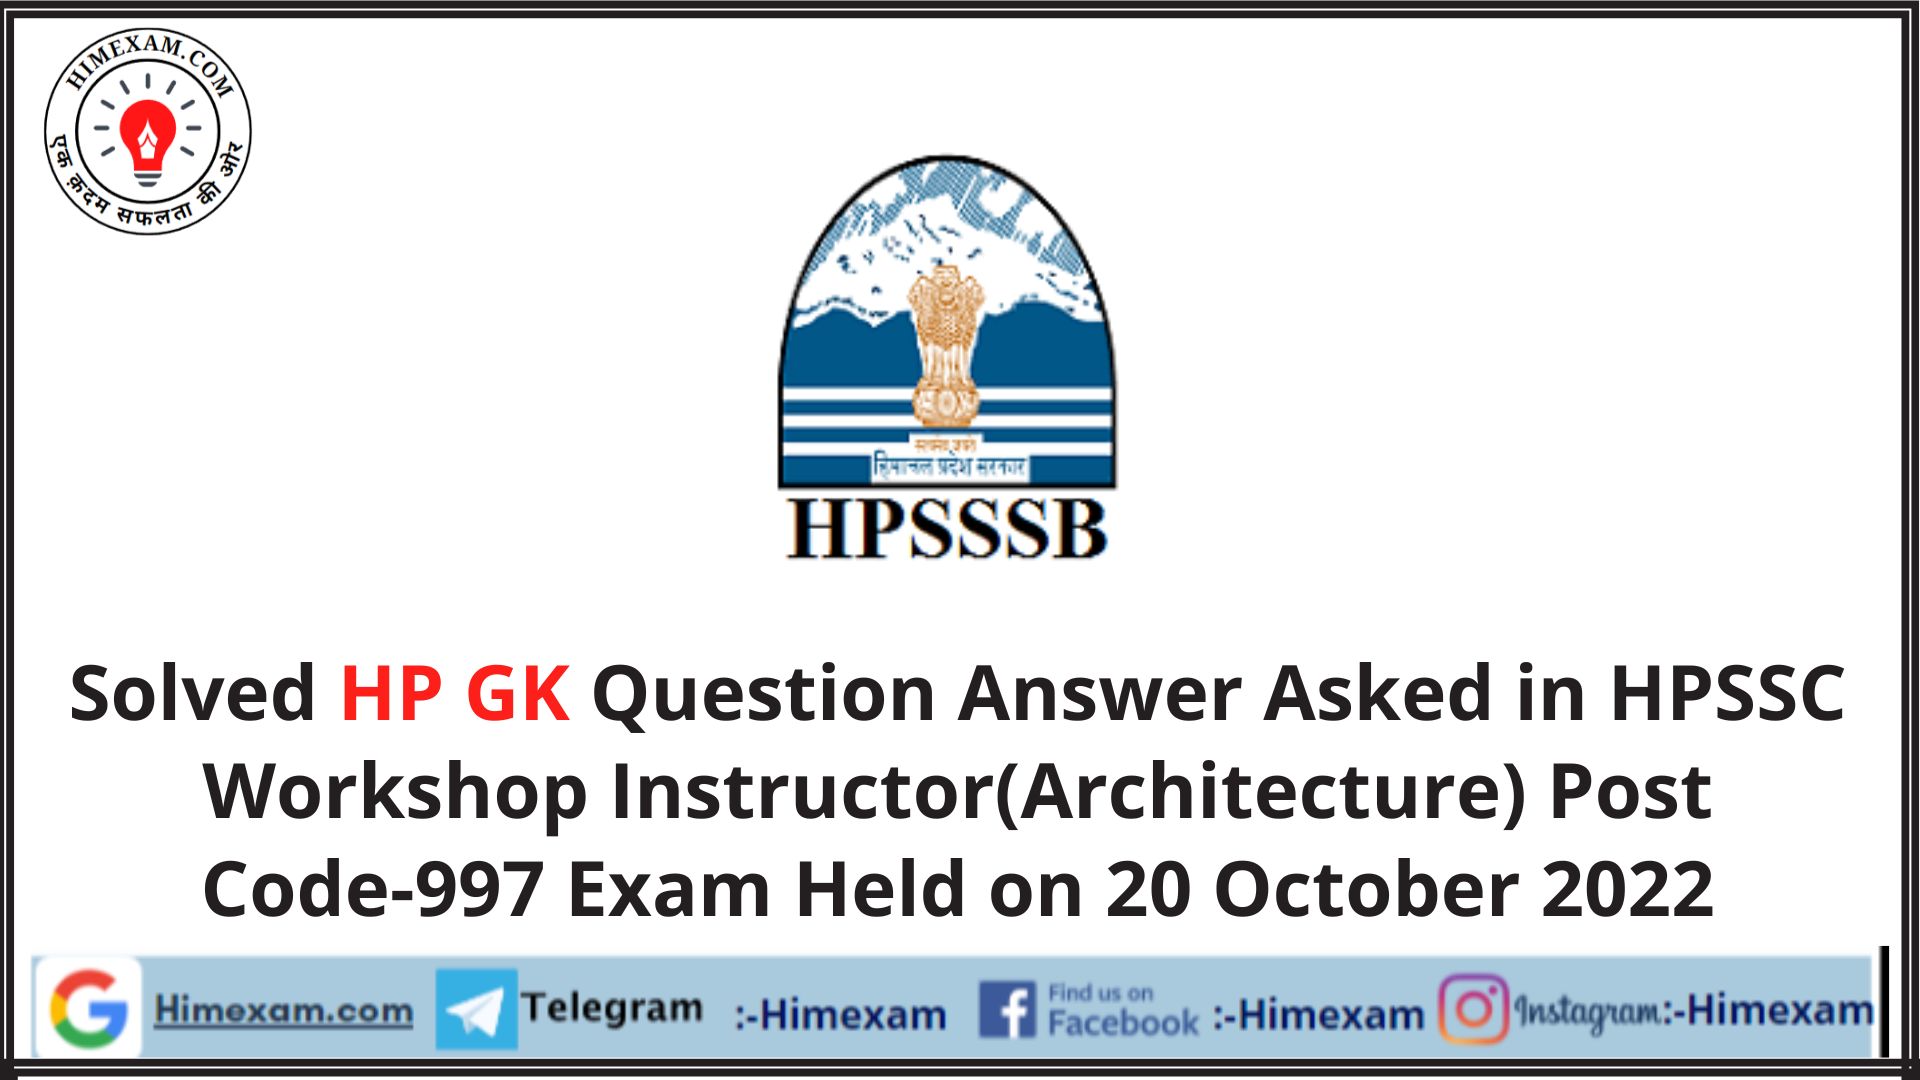 Solved HP GK Question Answer Asked in HPSSC Workshop Instructor(Architecture) Post Code-997 Exam Held on 20 October 2022